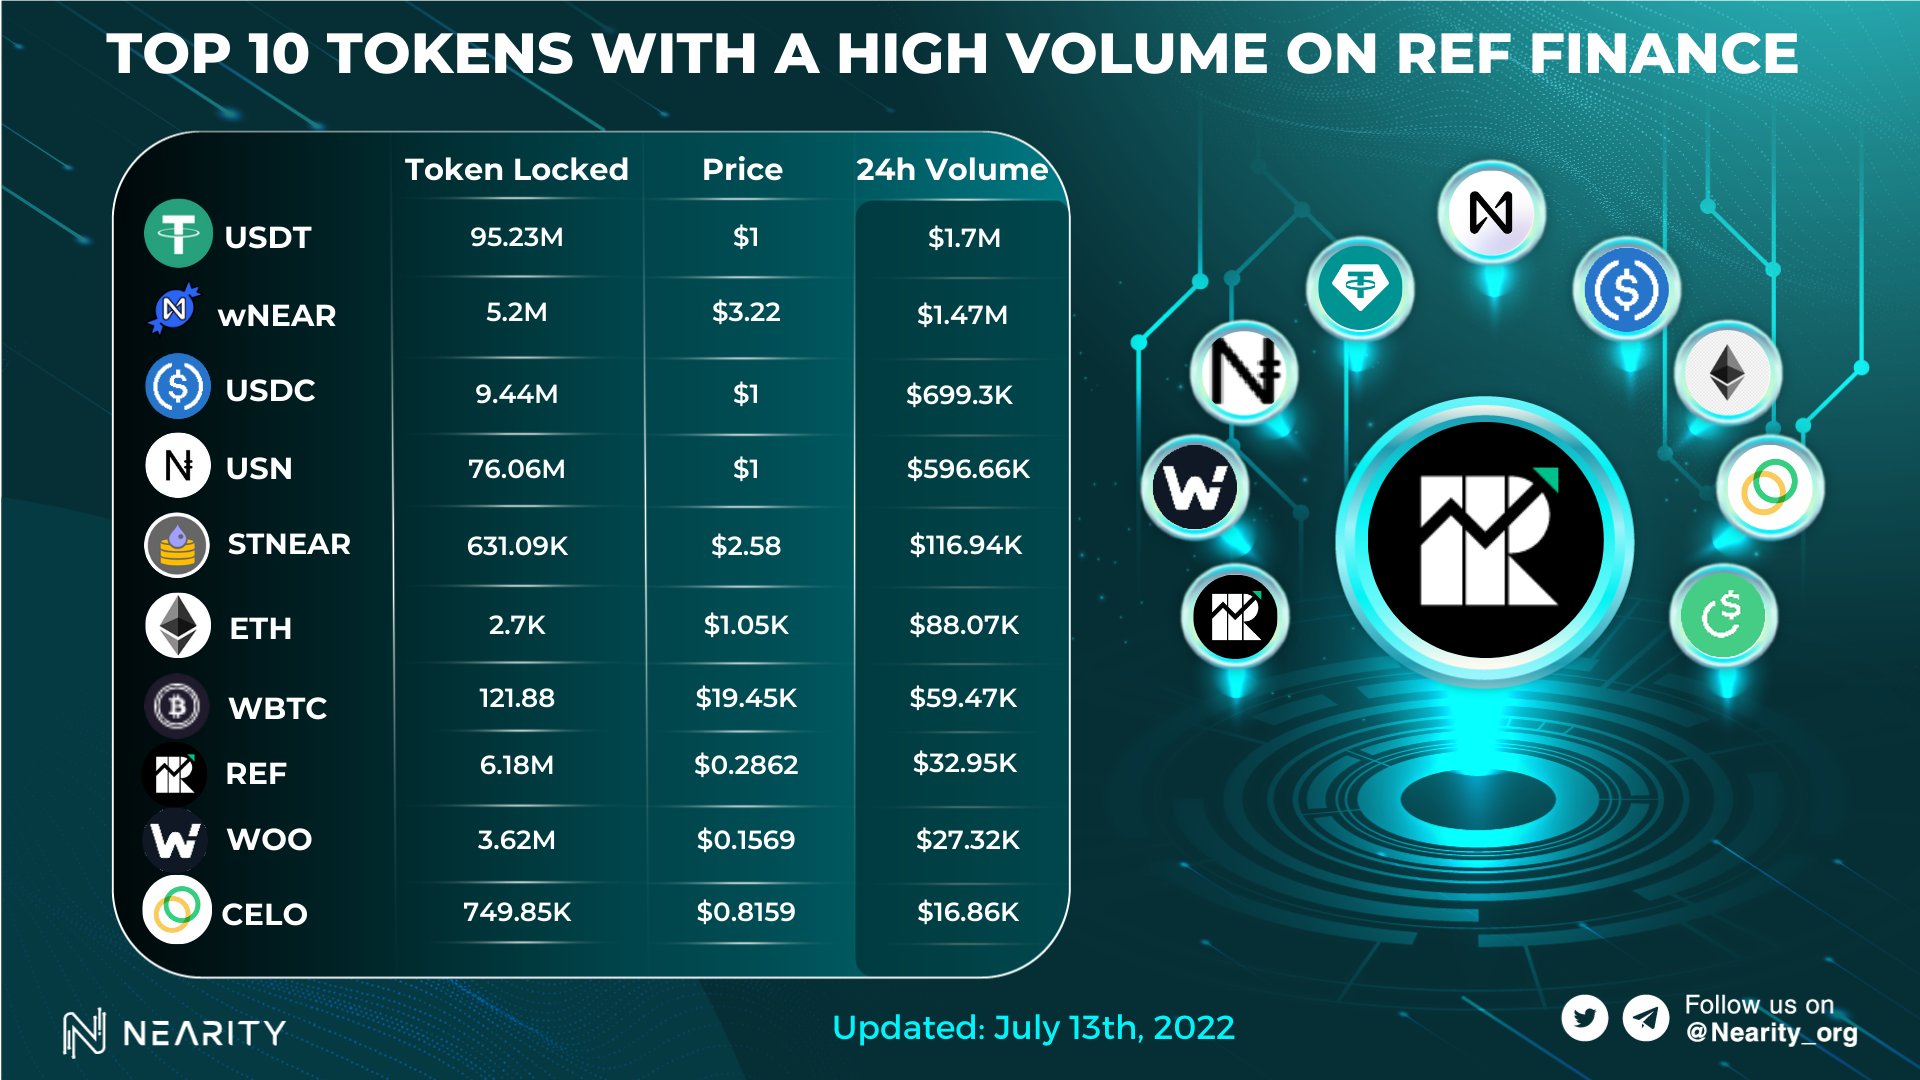 Top 10 tokens with a high 24h volume